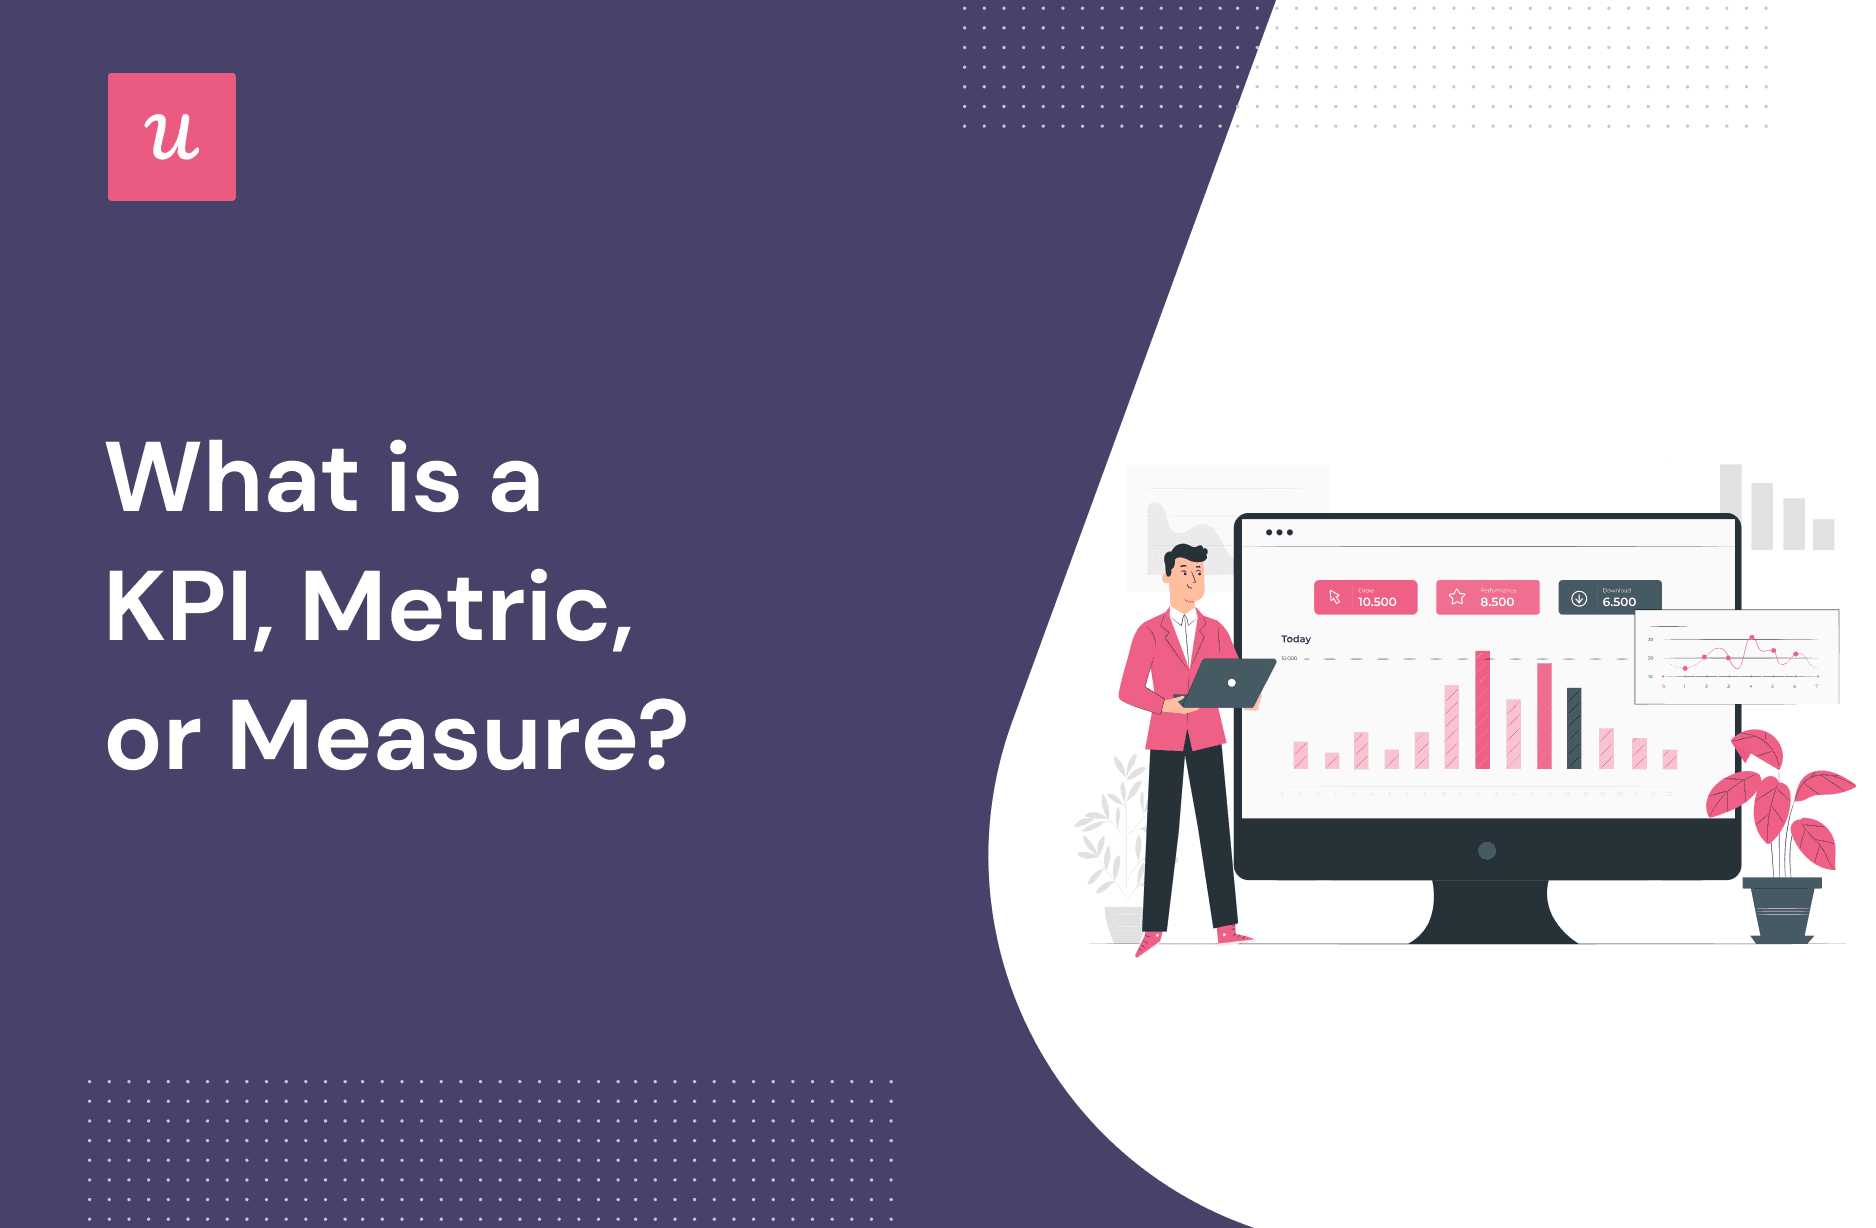 What is a KPI, Metric, or Measure?